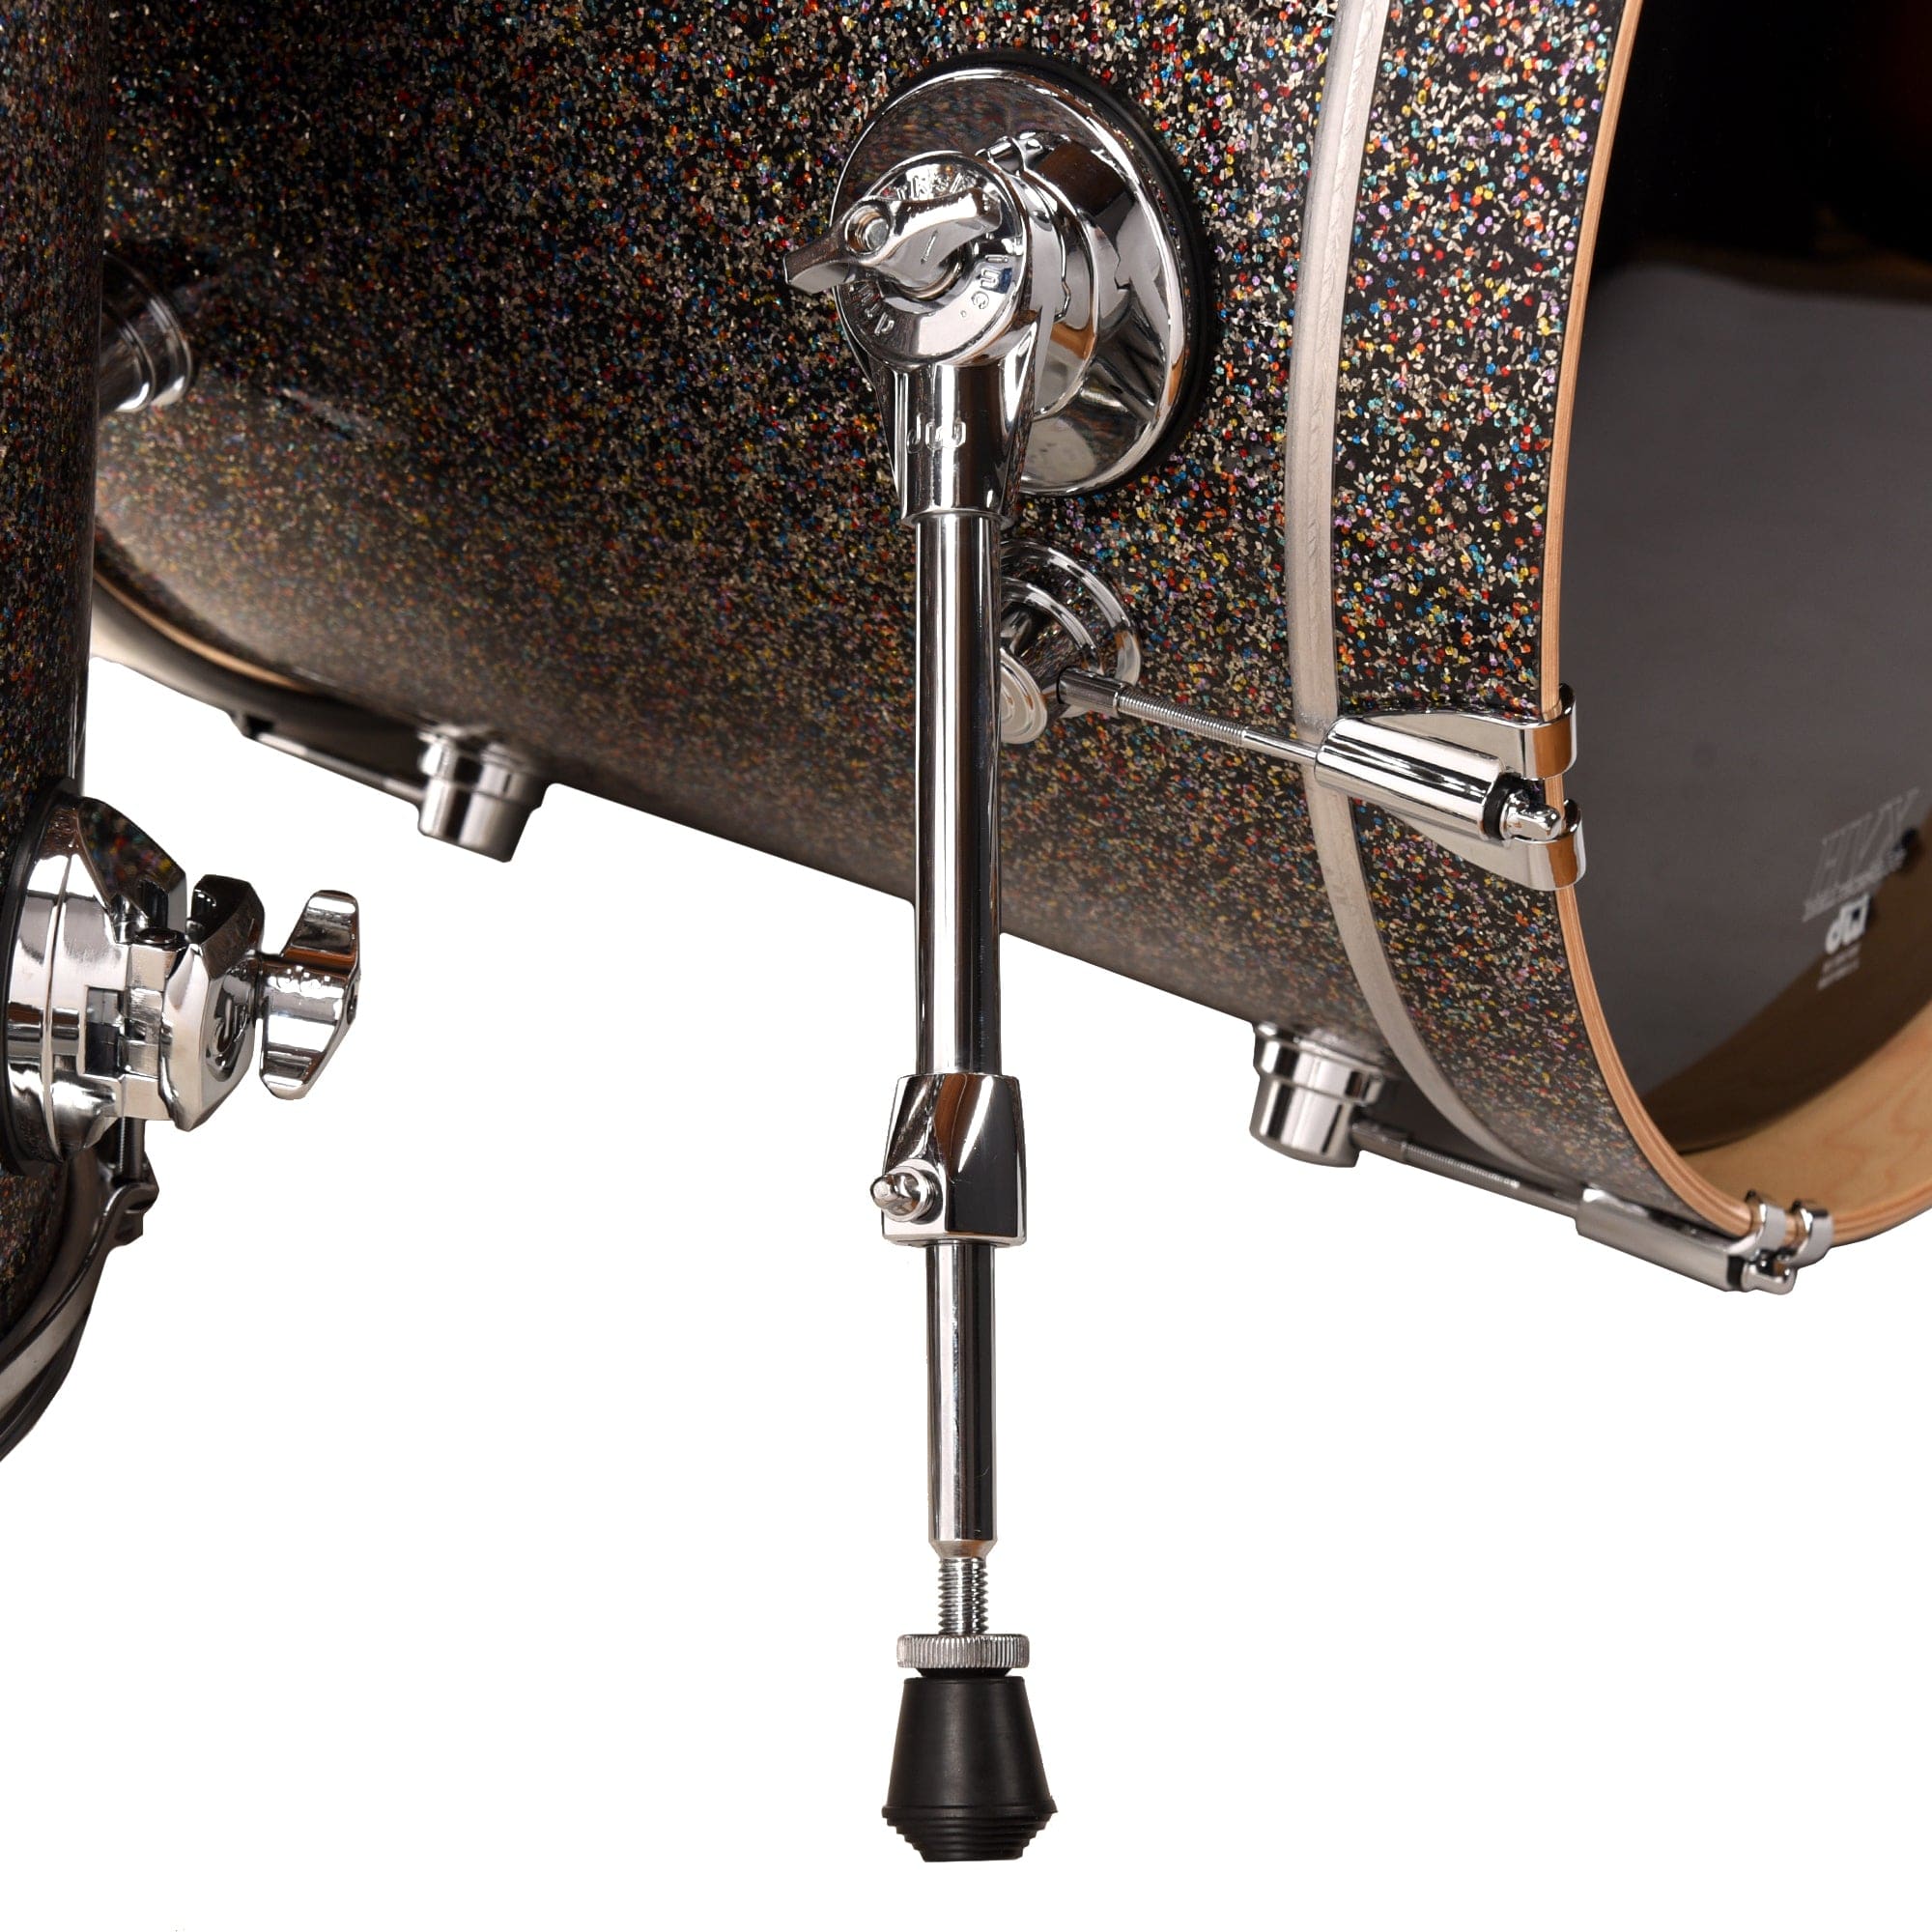 DW Performance Series 13/16/24 3pc. Drum Kit Confetti Sparkle Drums and Percussion / Acoustic Drums / Full Acoustic Kits